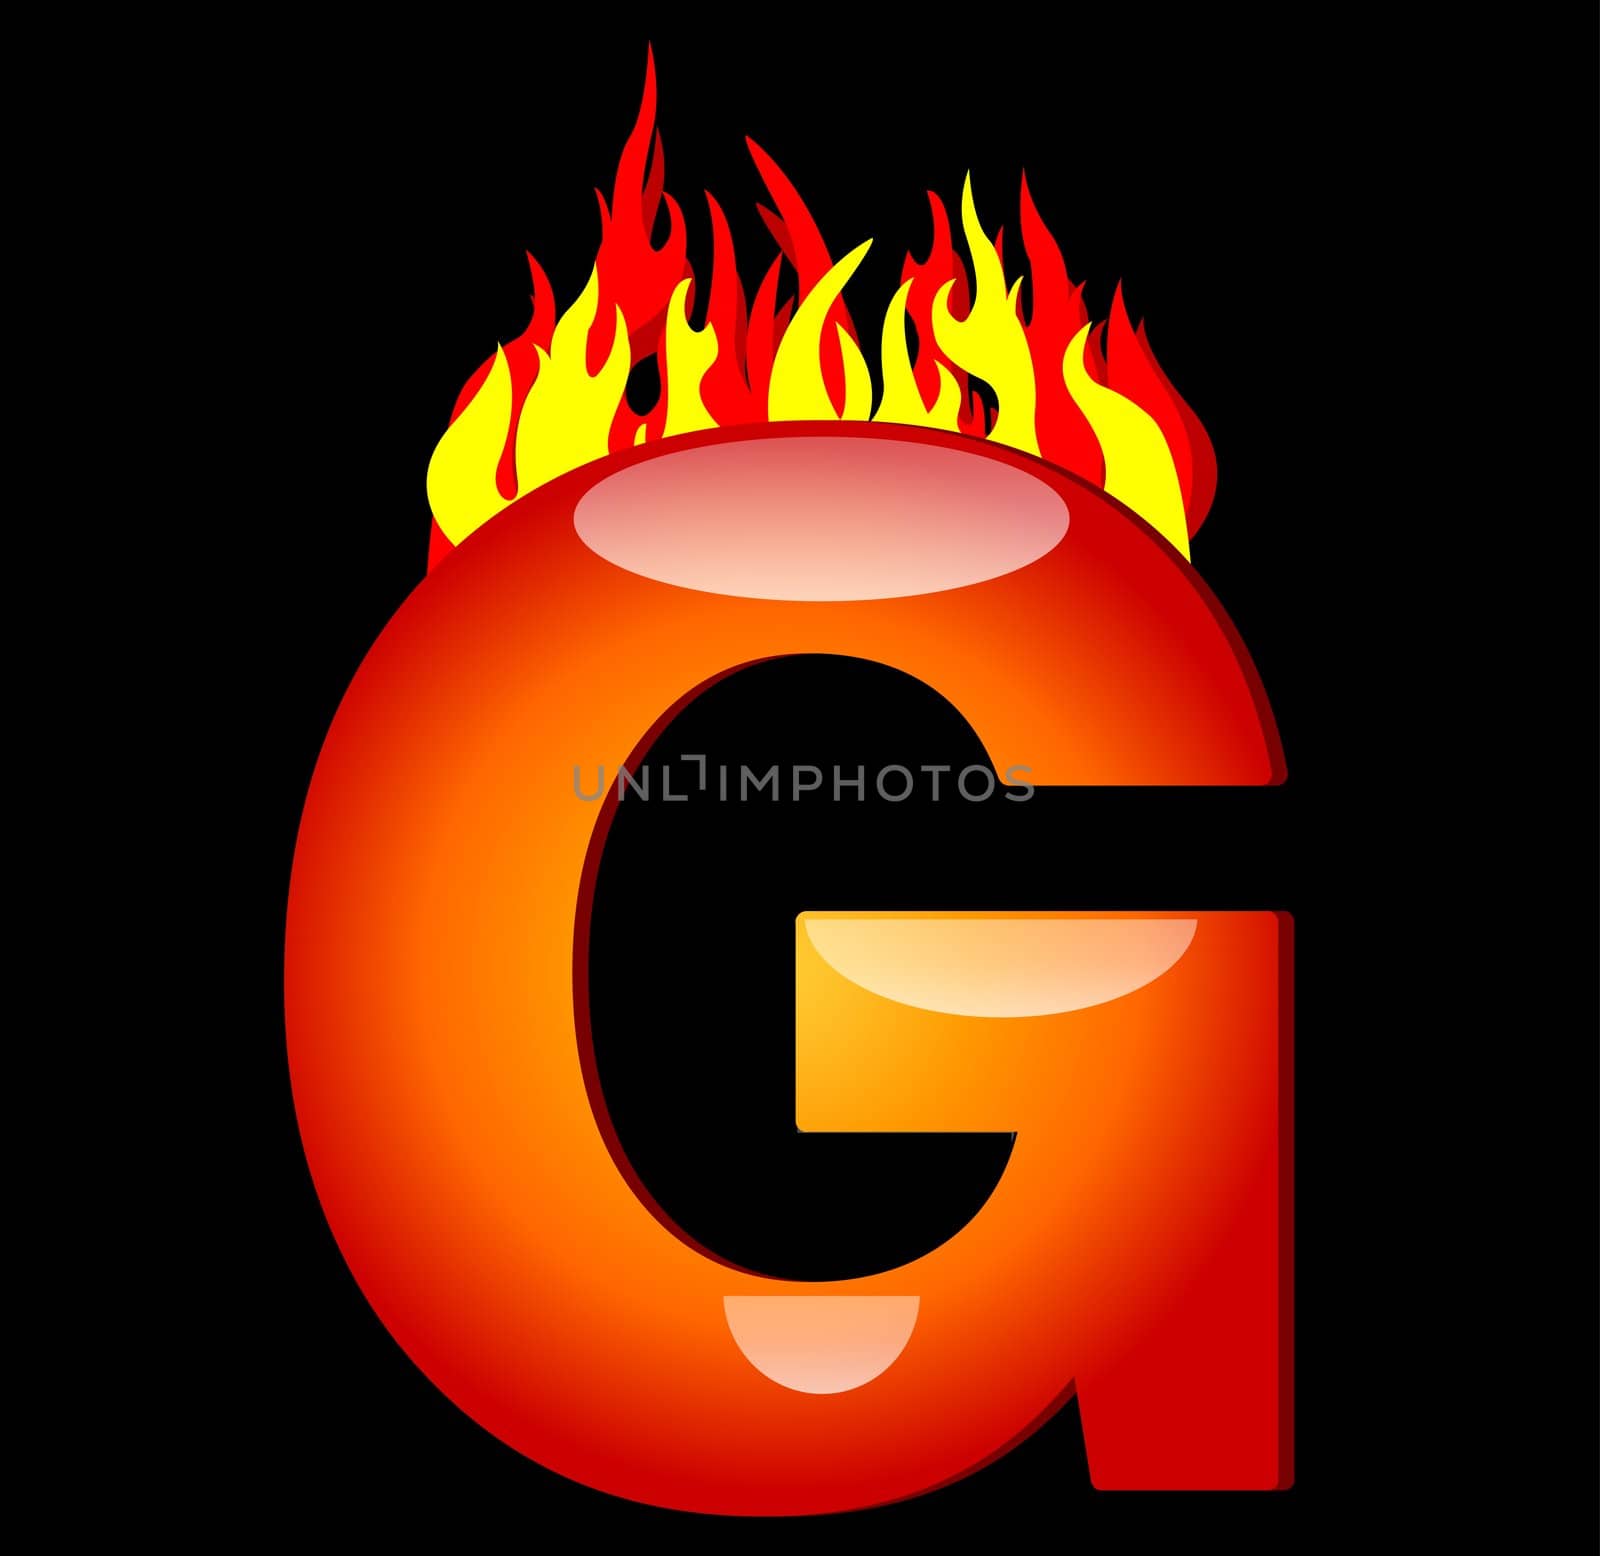 Letter G on Fire by peromarketing